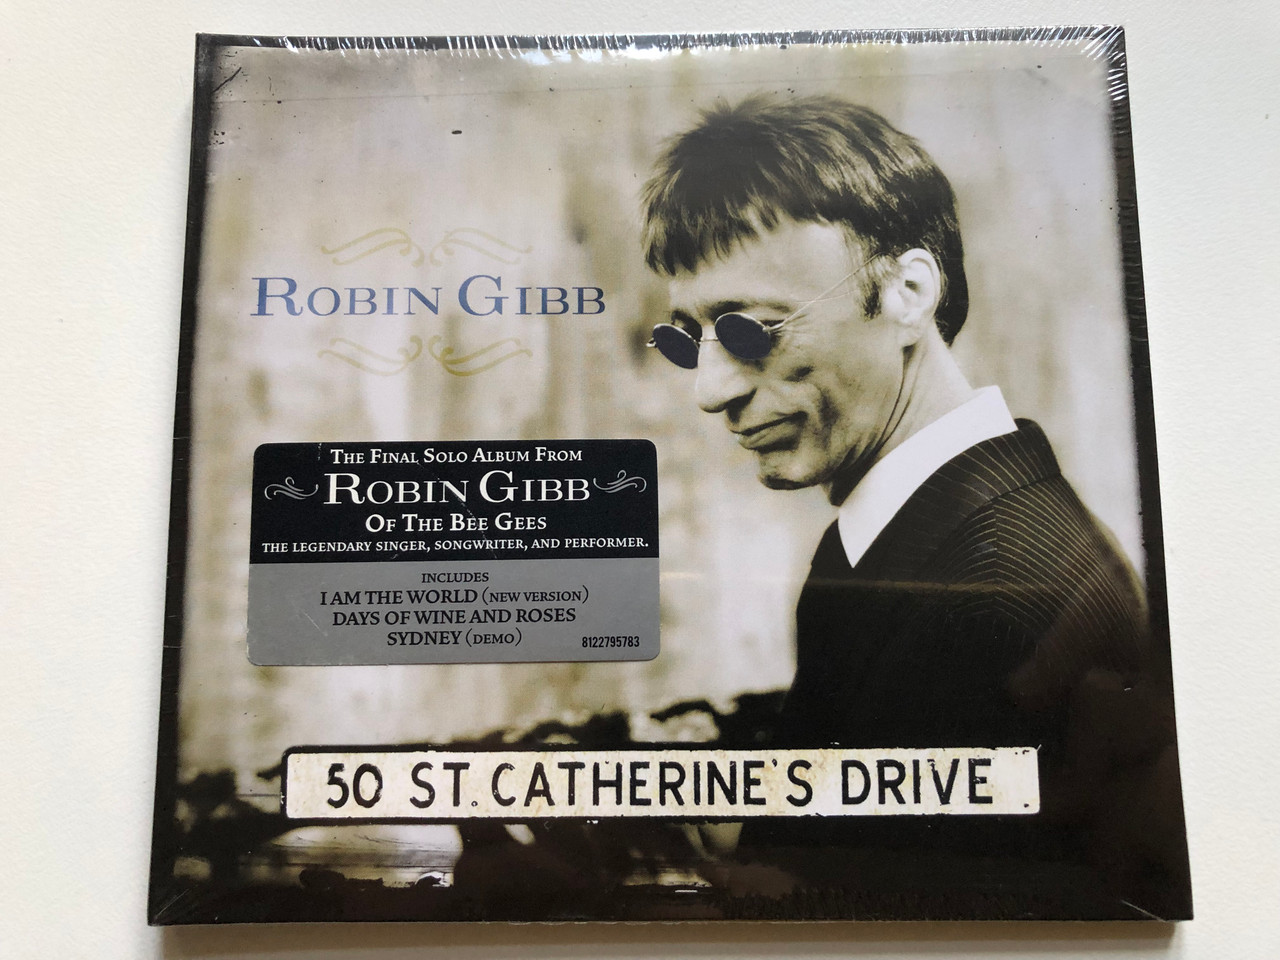 https://cdn10.bigcommerce.com/s-62bdpkt7pb/products/0/images/256234/Robin_Gibb_50_St._Catherines_Drive_The_Final_Solo_Album_From_Robin_Gibb_Of_The_Bee_Gees_-_The_Legendary_Singer_Songwriter_and_Performer_Reprise_Records_Audio_CD_2014_8122-79578-3_1__02926.1665662391.1280.1280.JPG?c=2&_gl=1*cstn4y*_ga*MjA2NTIxMjE2MC4xNTkwNTEyNTMy*_ga_WS2VZYPC6G*MTY2NTY0ODE2NC41OTEuMS4xNjY1NjYyMTY2LjQzLjAuMA..